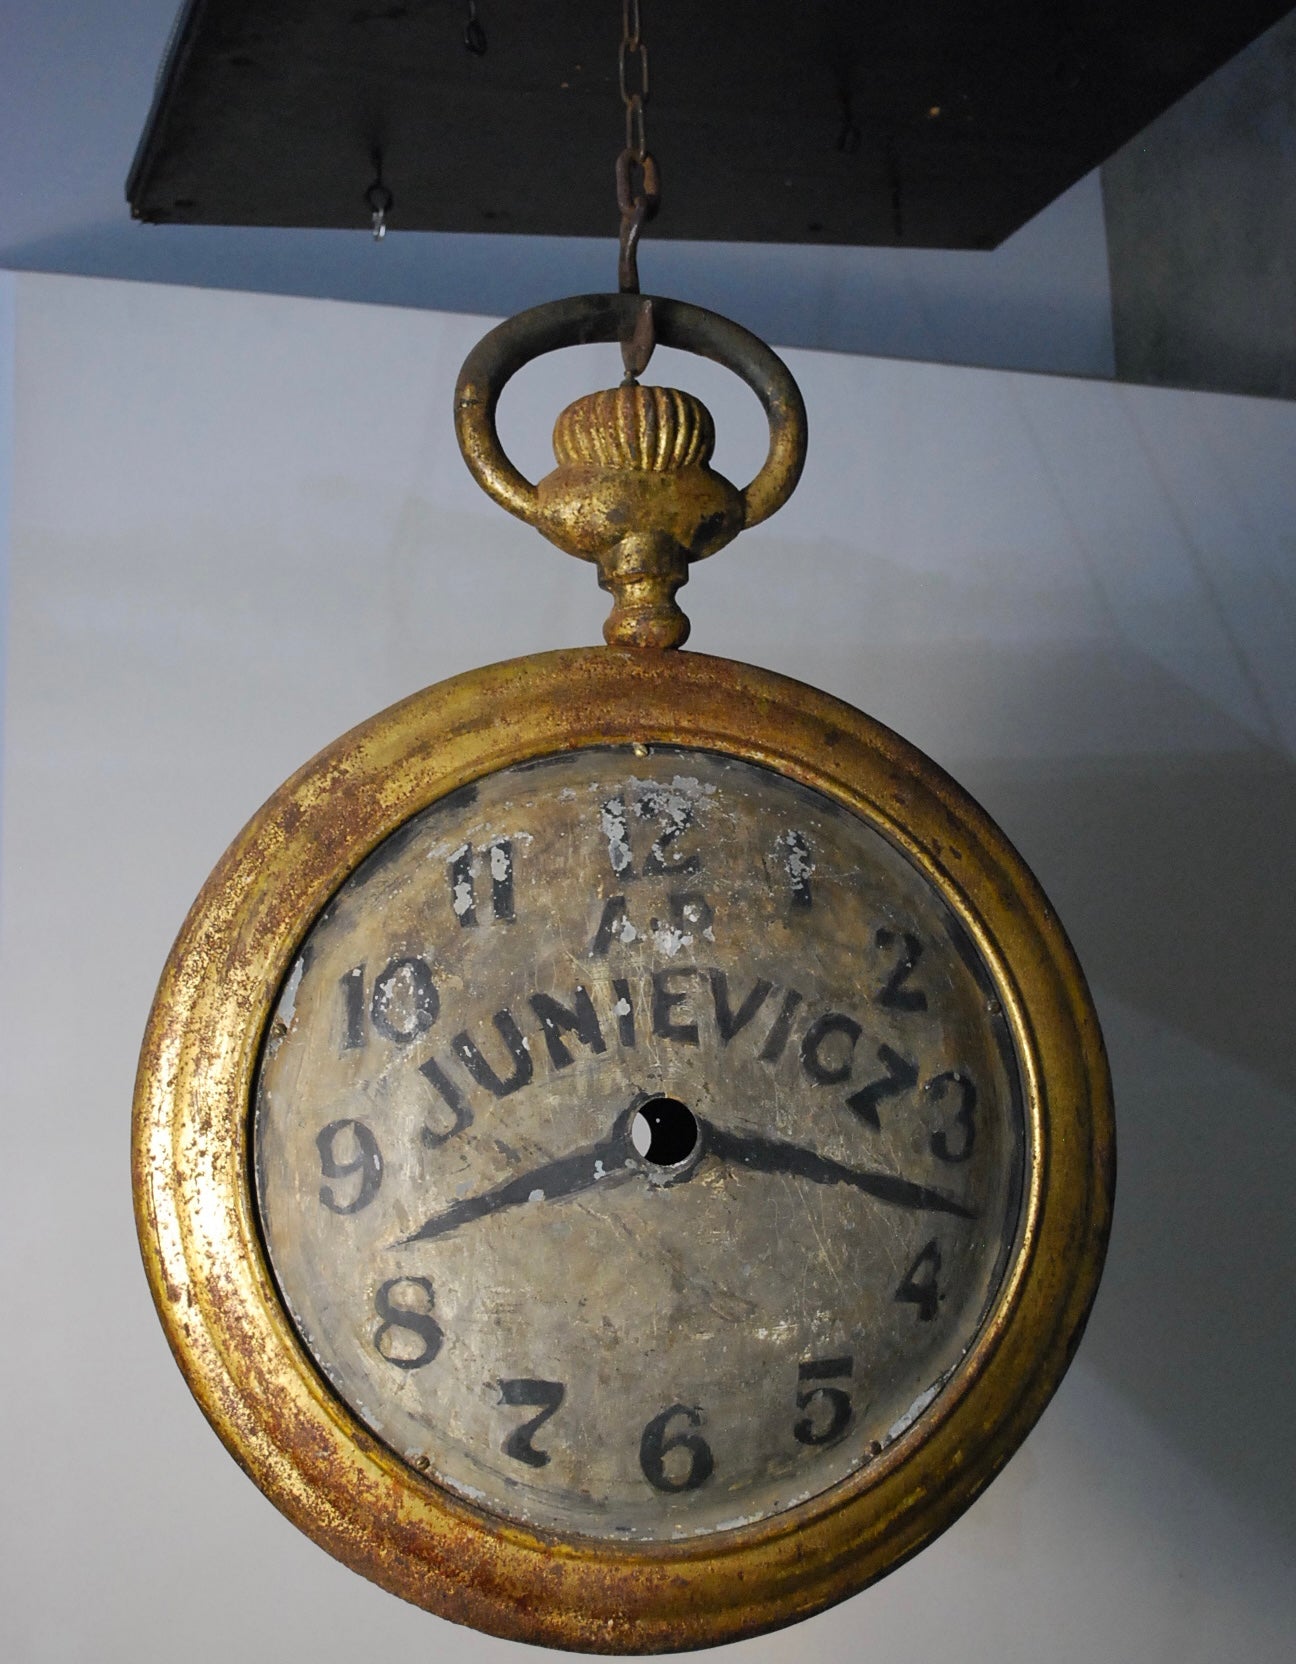 19th c French jeweller /Clock trade sign | Scott Landon Antiques and Interiors.